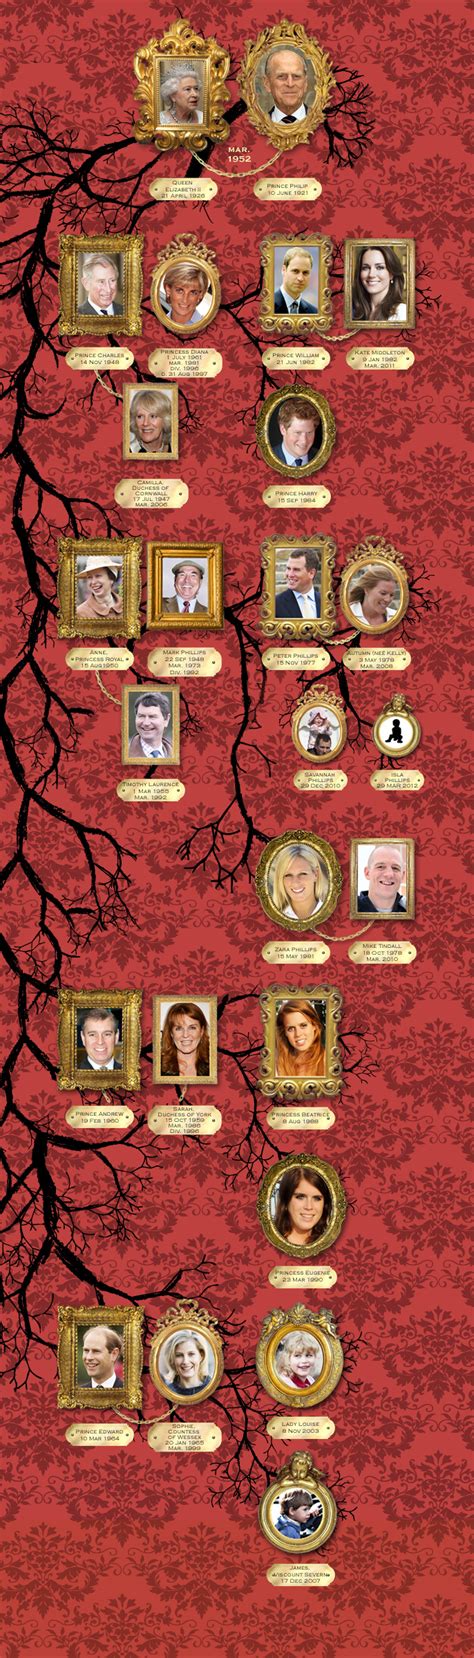 Queen elizabeth ii and her husband, the duke of edinburgh, prince phillip, are distantly related. Pin by Pamela Vivian on Royalty | Royal family trees ...